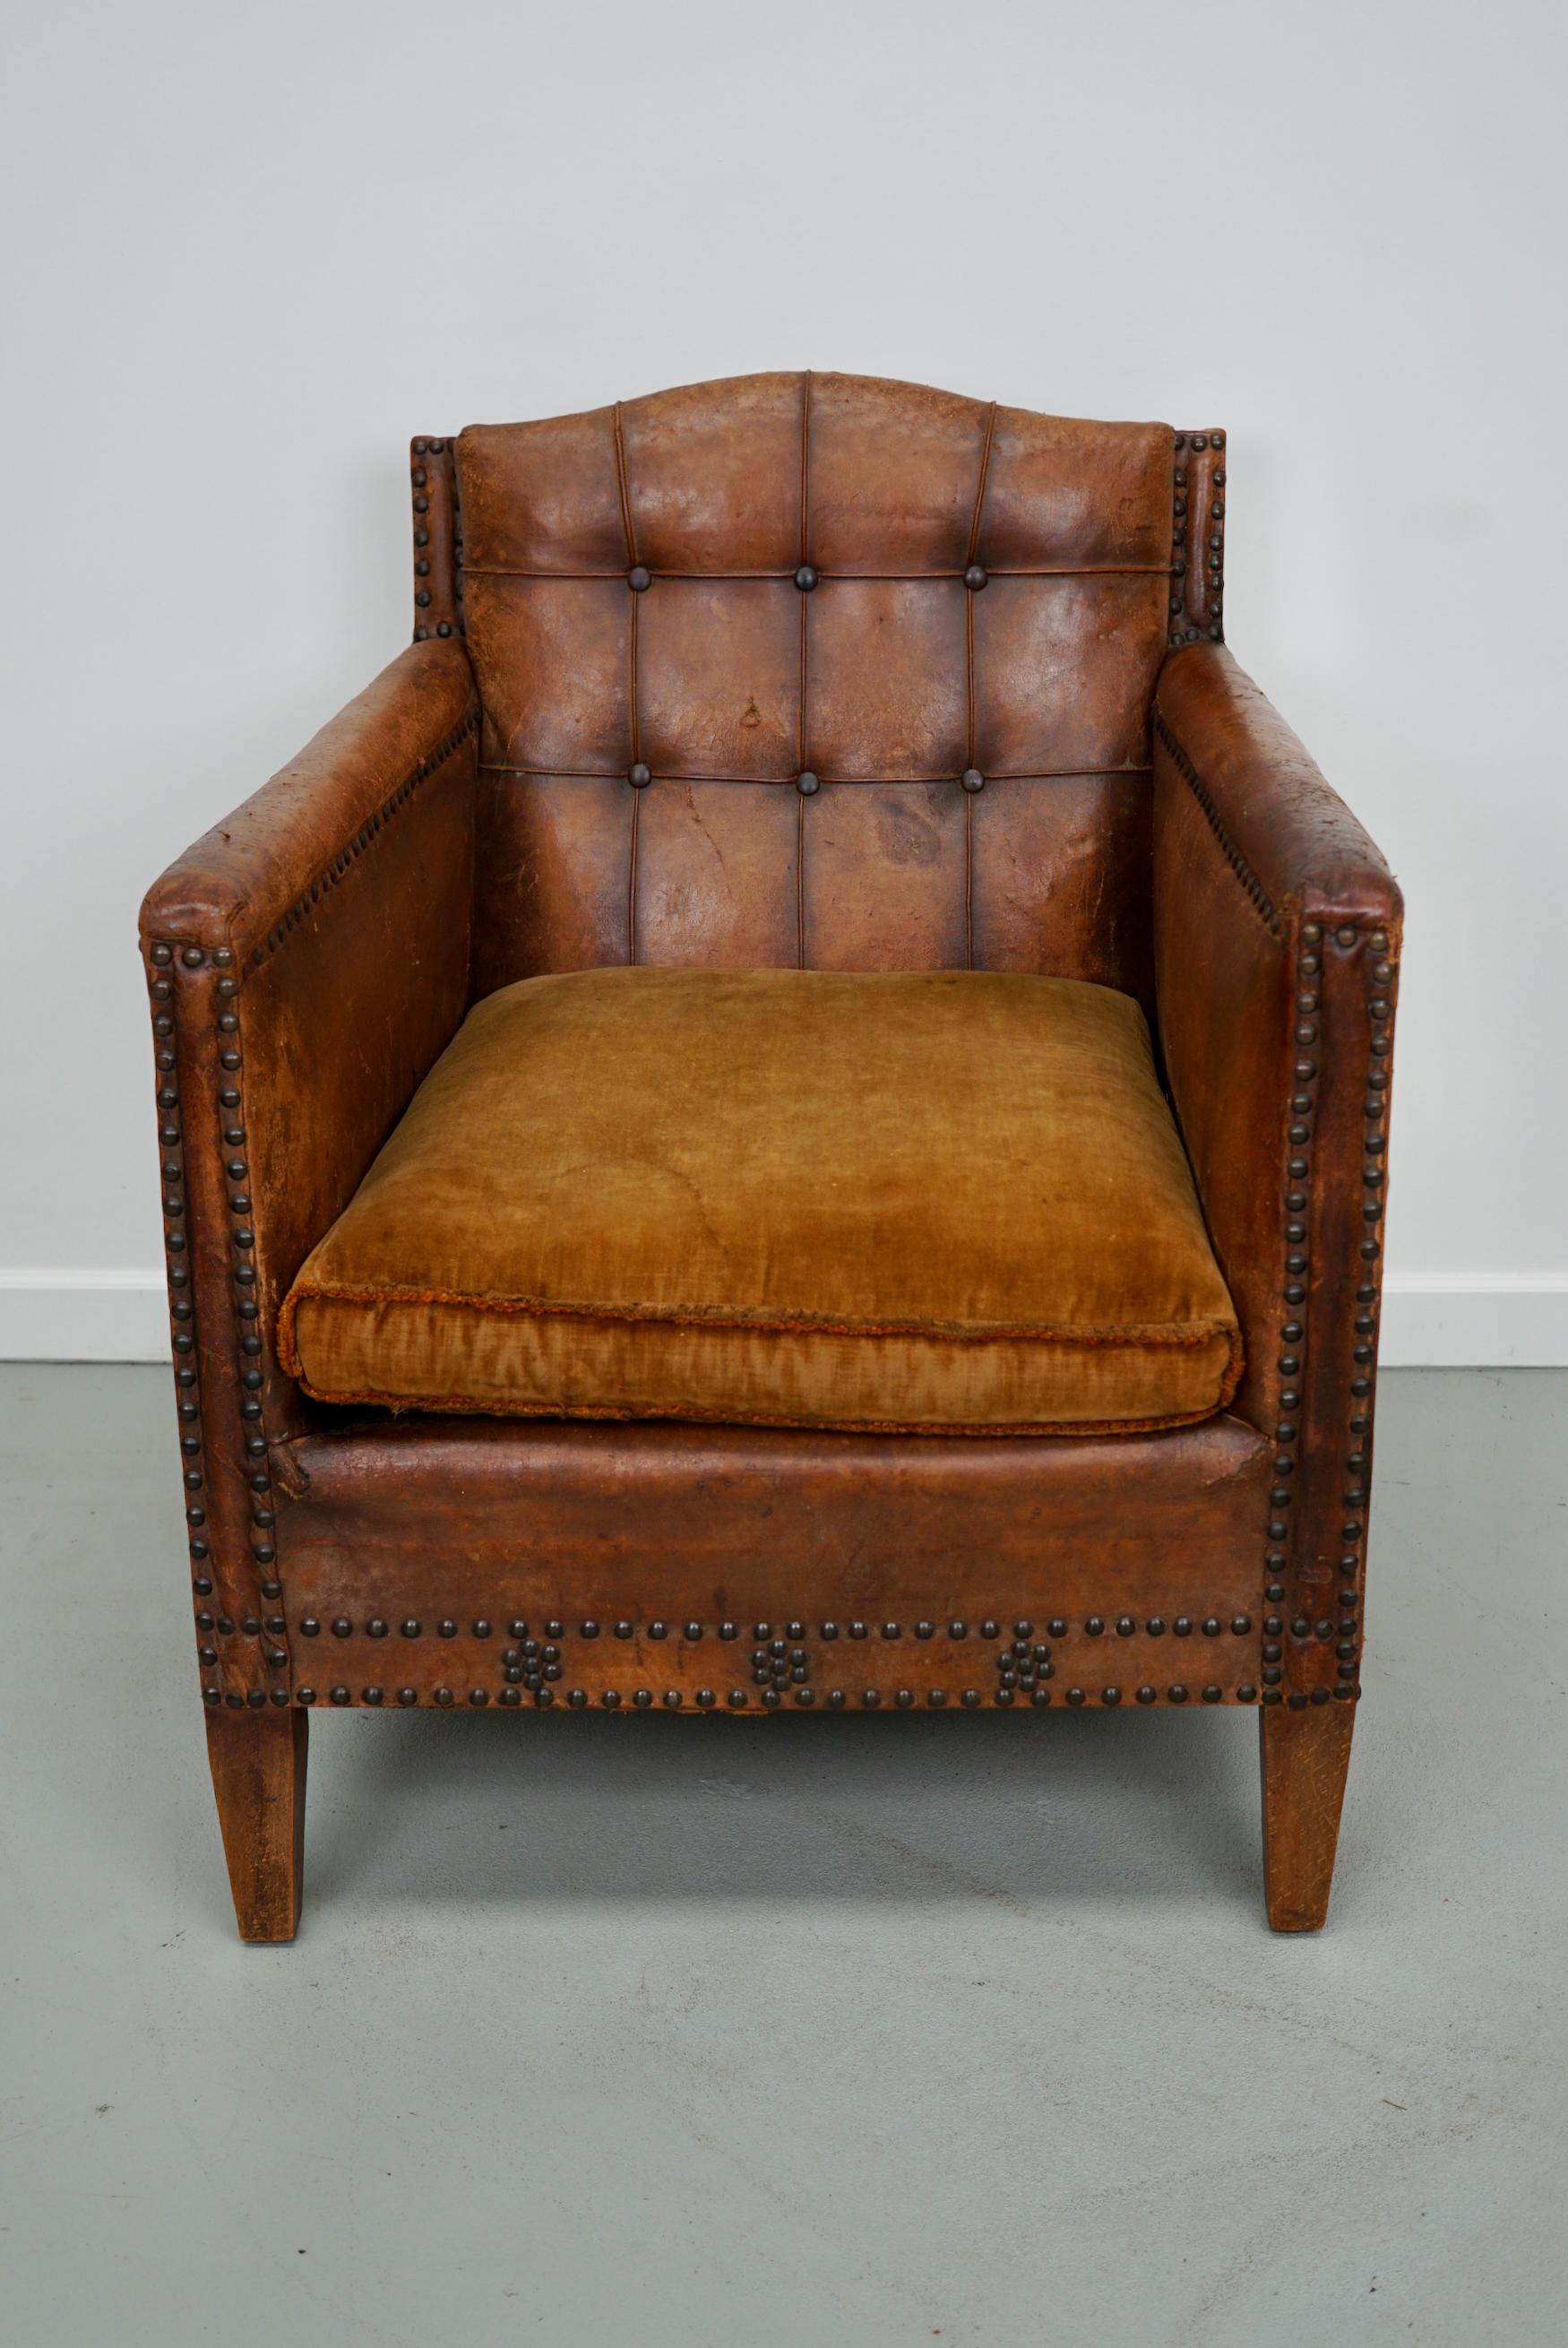 This leather club chair was made in France in the early 20th century. It features a solid wooden frame covered in sheep leather decorated with nails and buttons in the back.